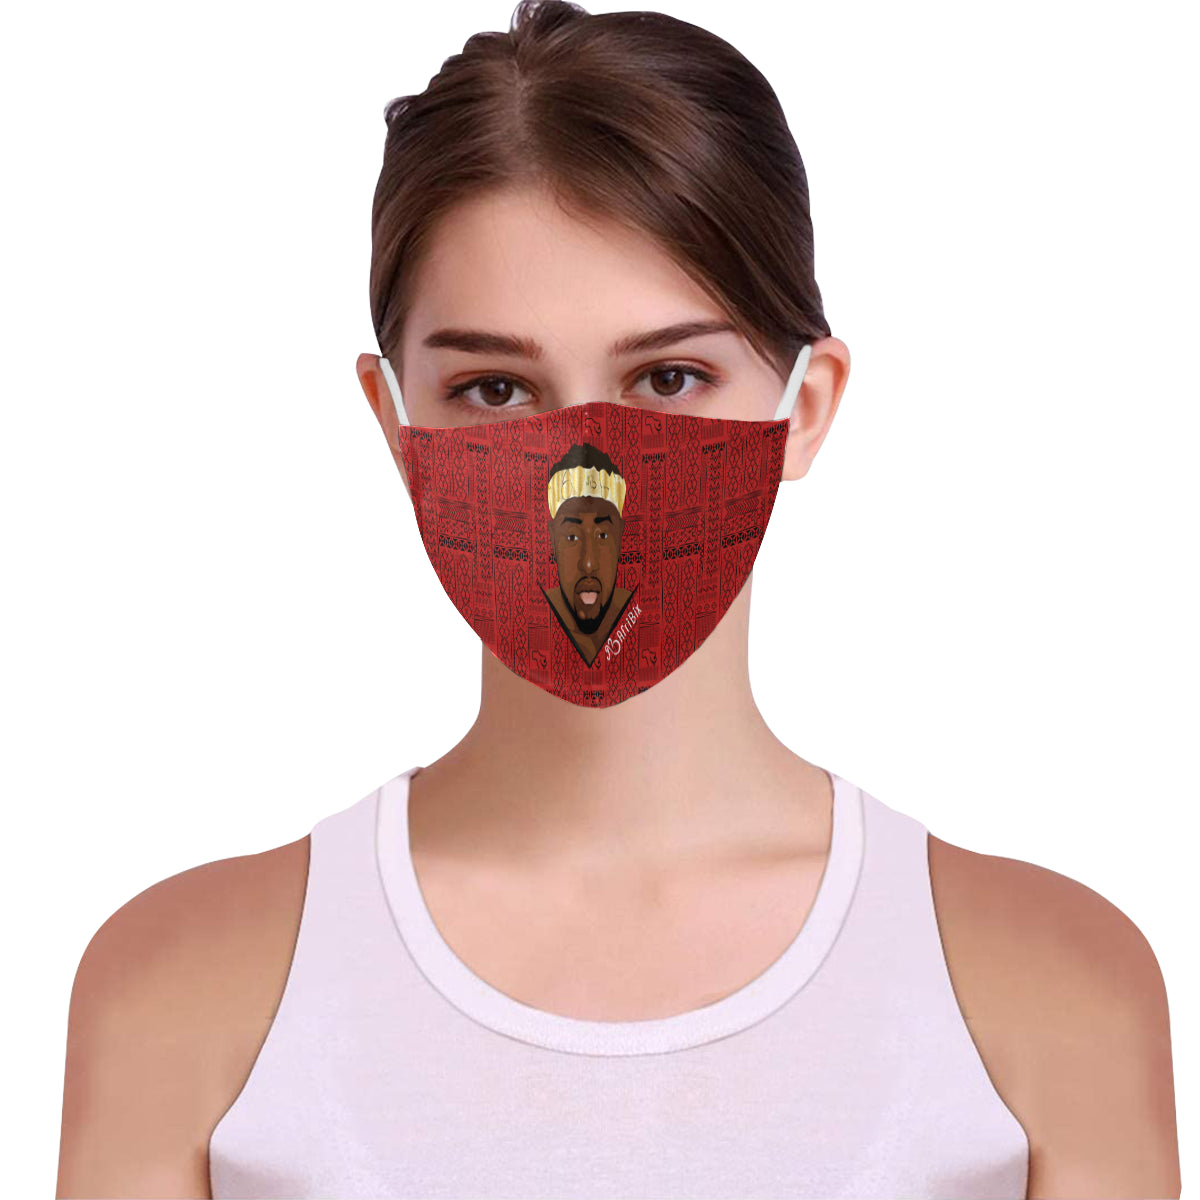 flyersetcinc Warrior King Cotton Fabric Face Mask with Filter Slot & Adjustable Strap (Pack of 5) - Non-medical use